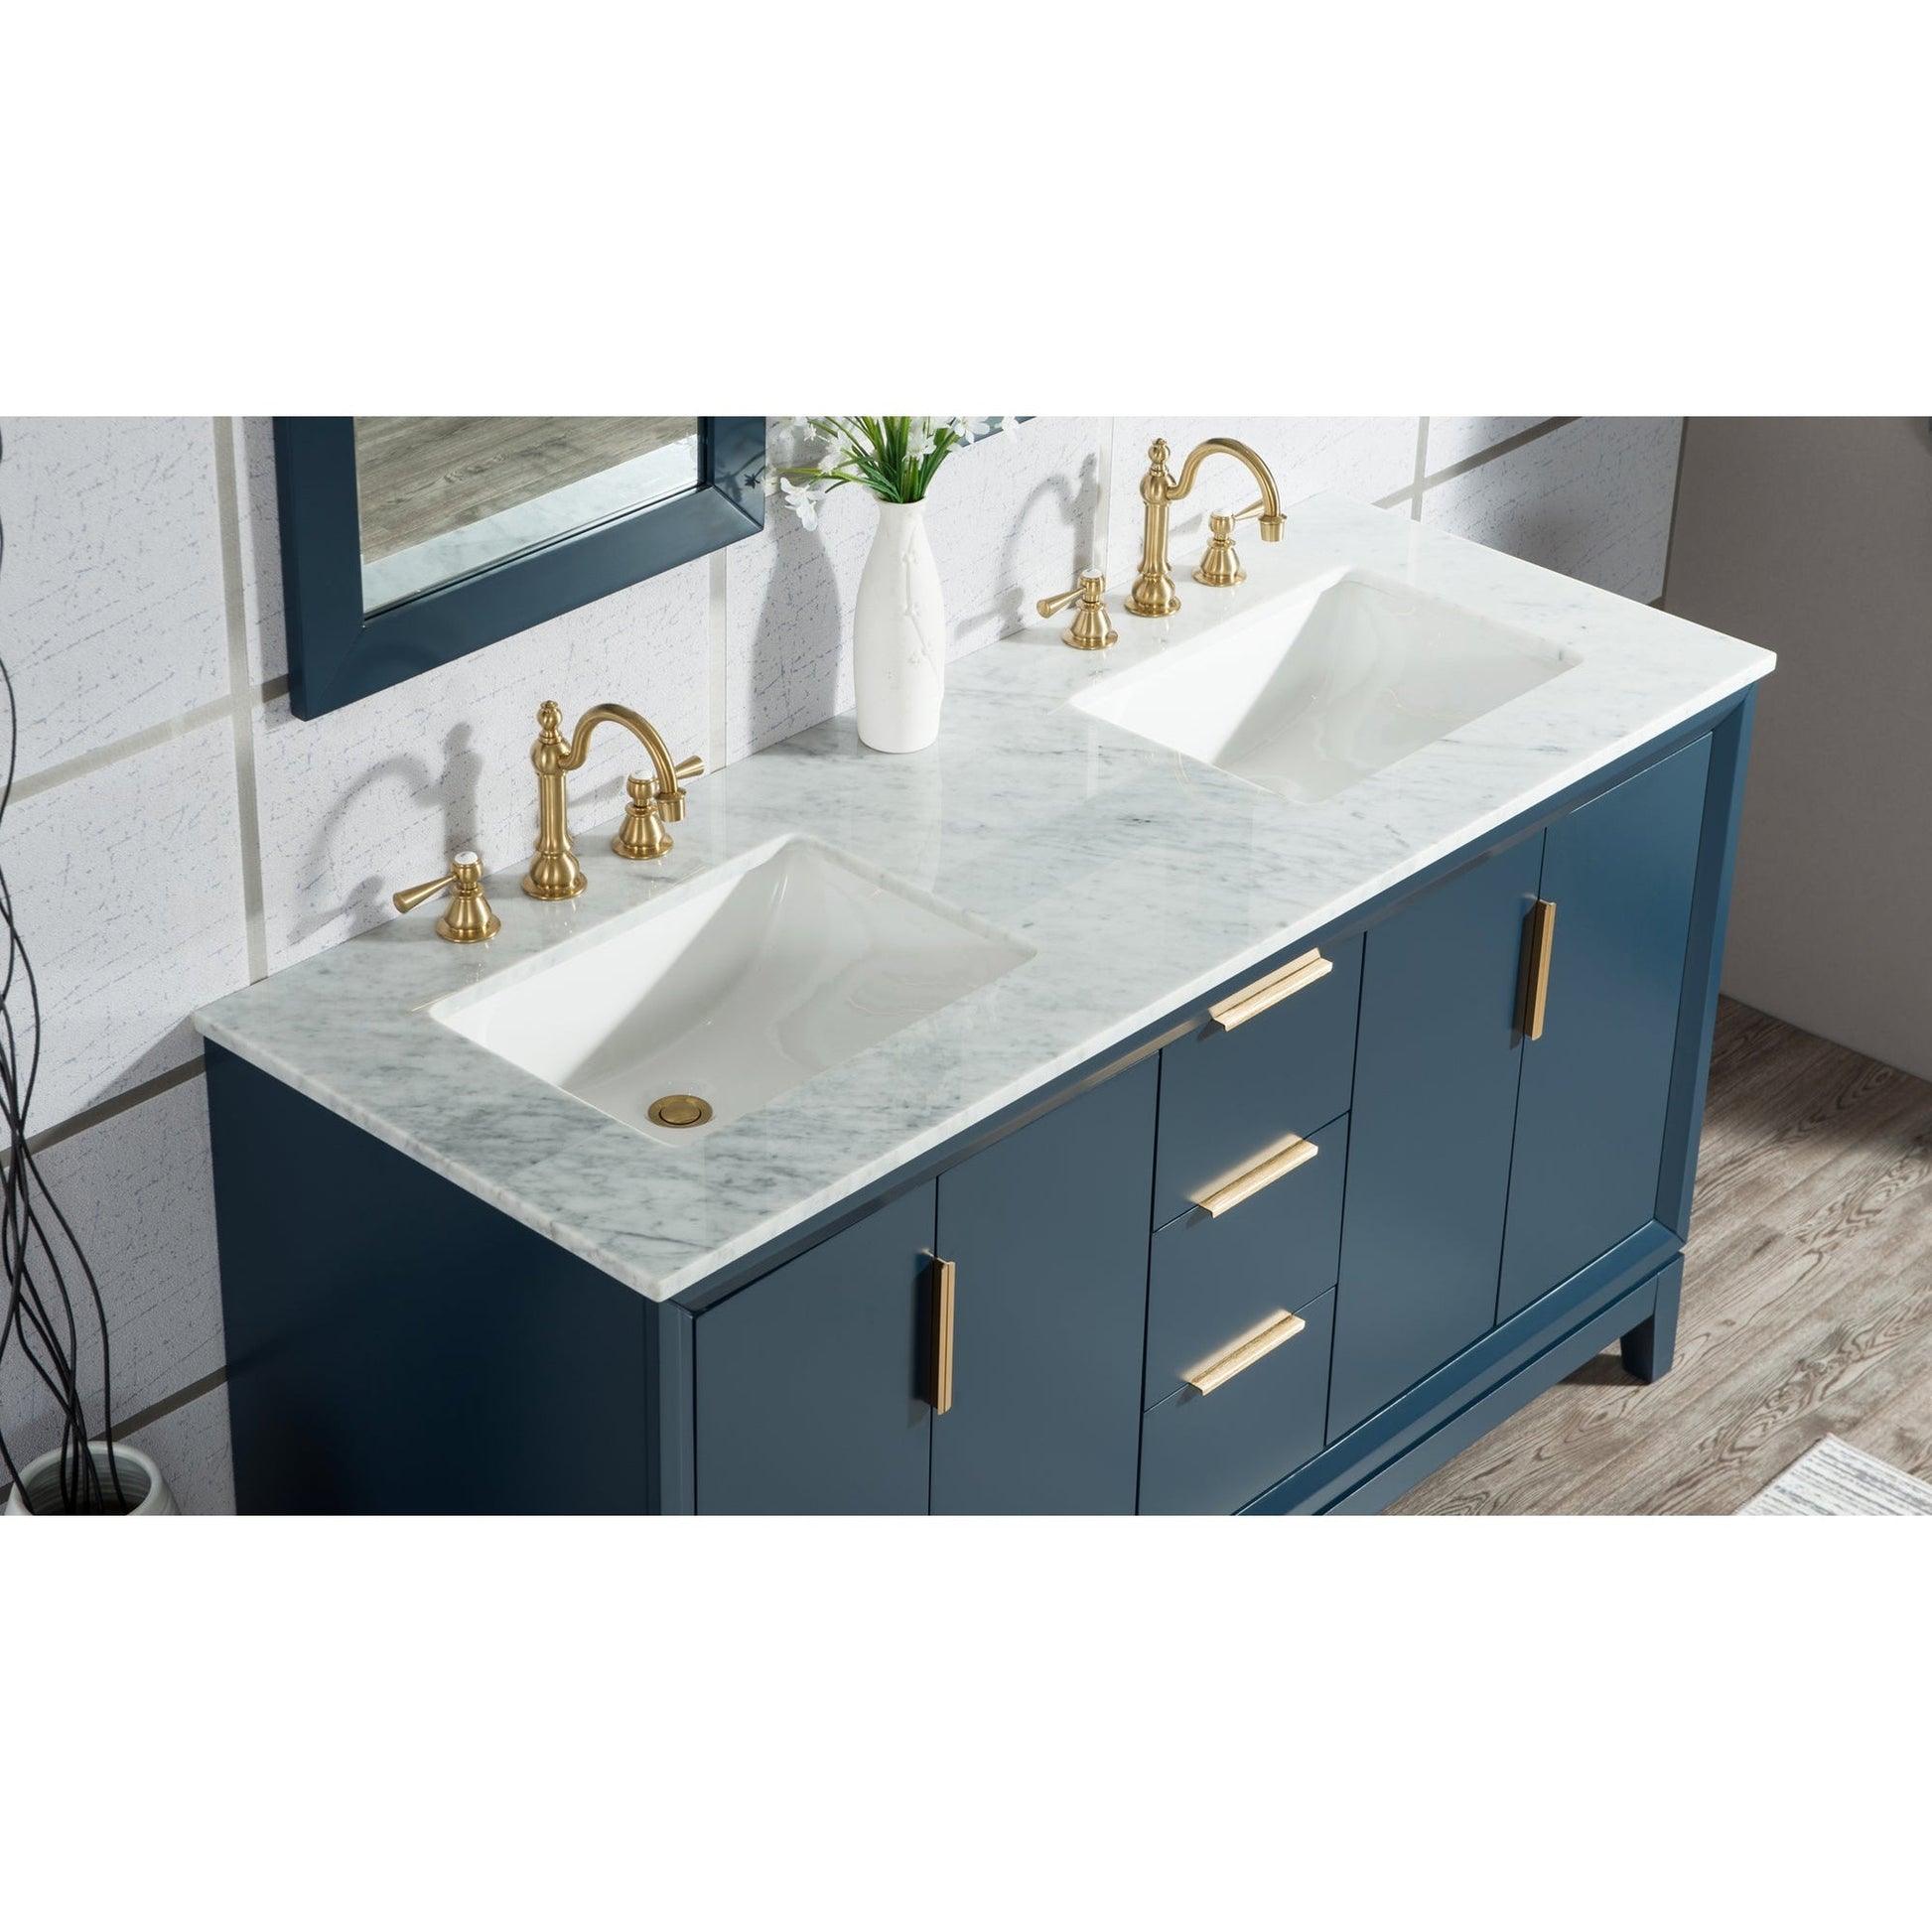 Water Creation Elizabeth 60" Double Sink Carrara White Marble Vanity In Monarch Blue With F2-0012-06-TL Lavatory Faucet